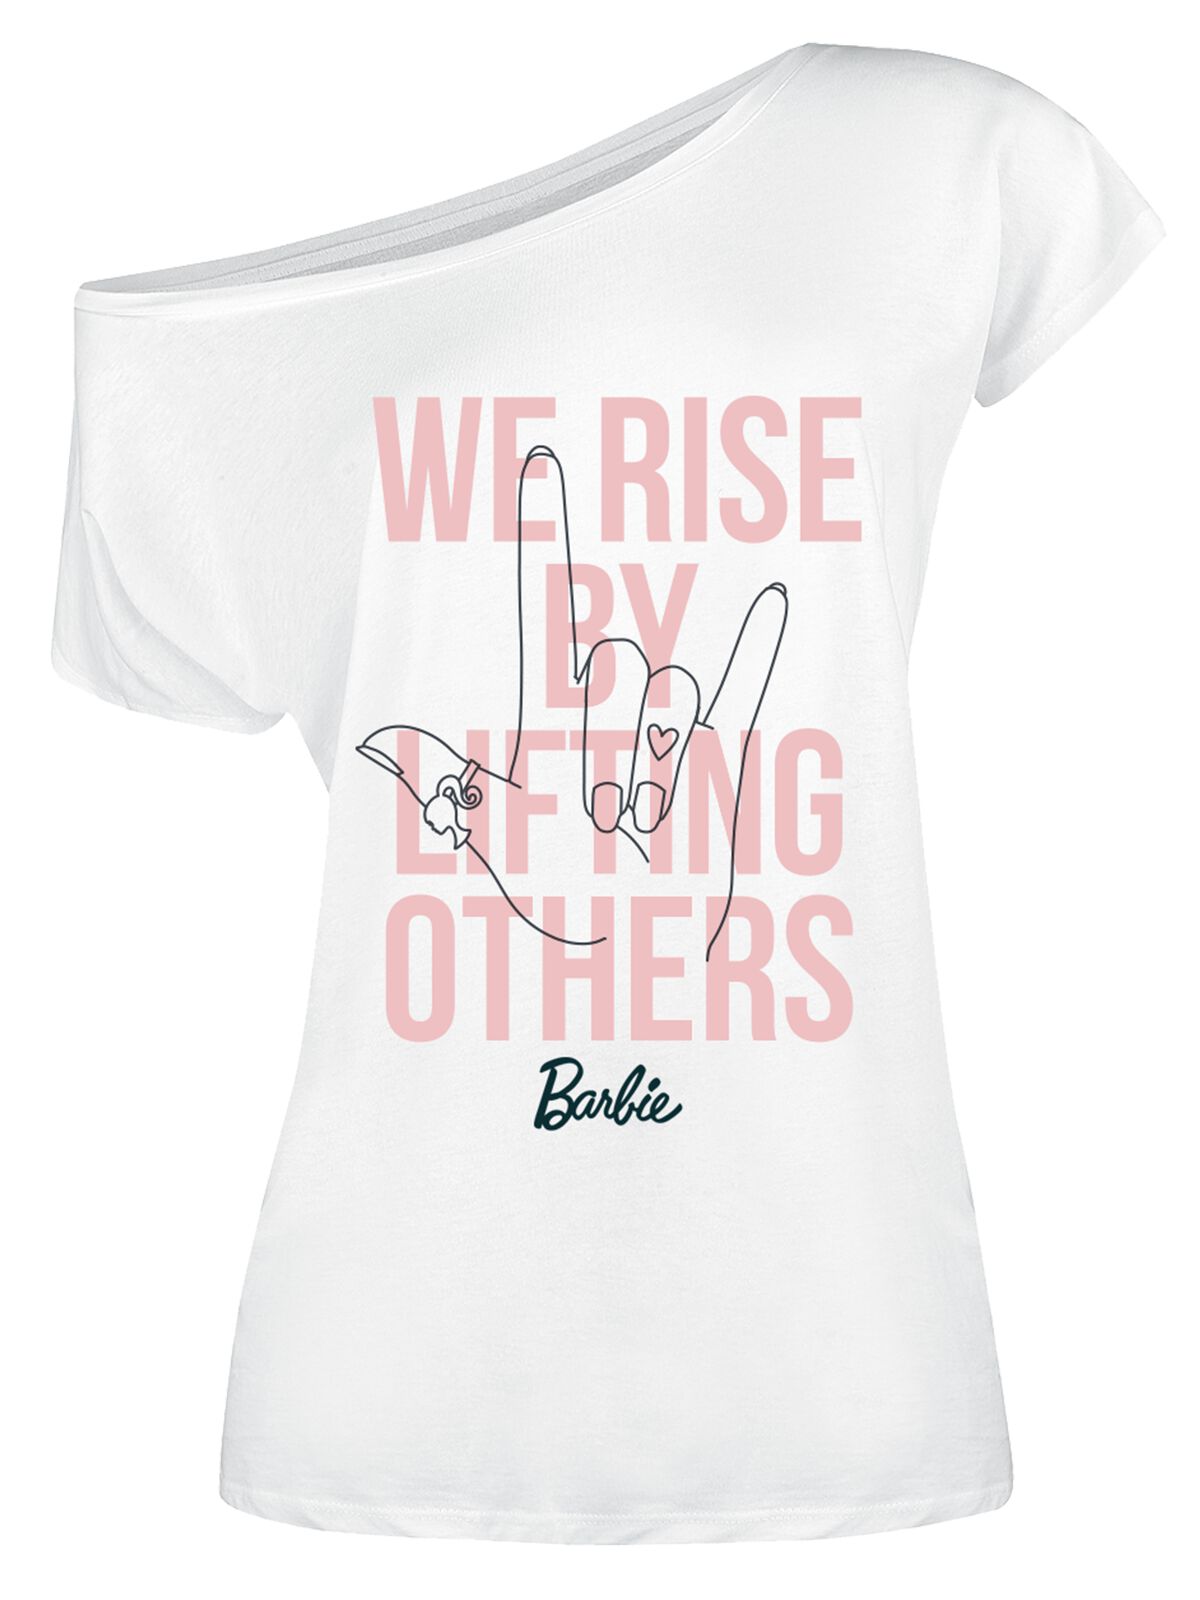 Image of T-Shirt di Barbie - We Rise By Lifting Others - S a XXL - Donna - bianco